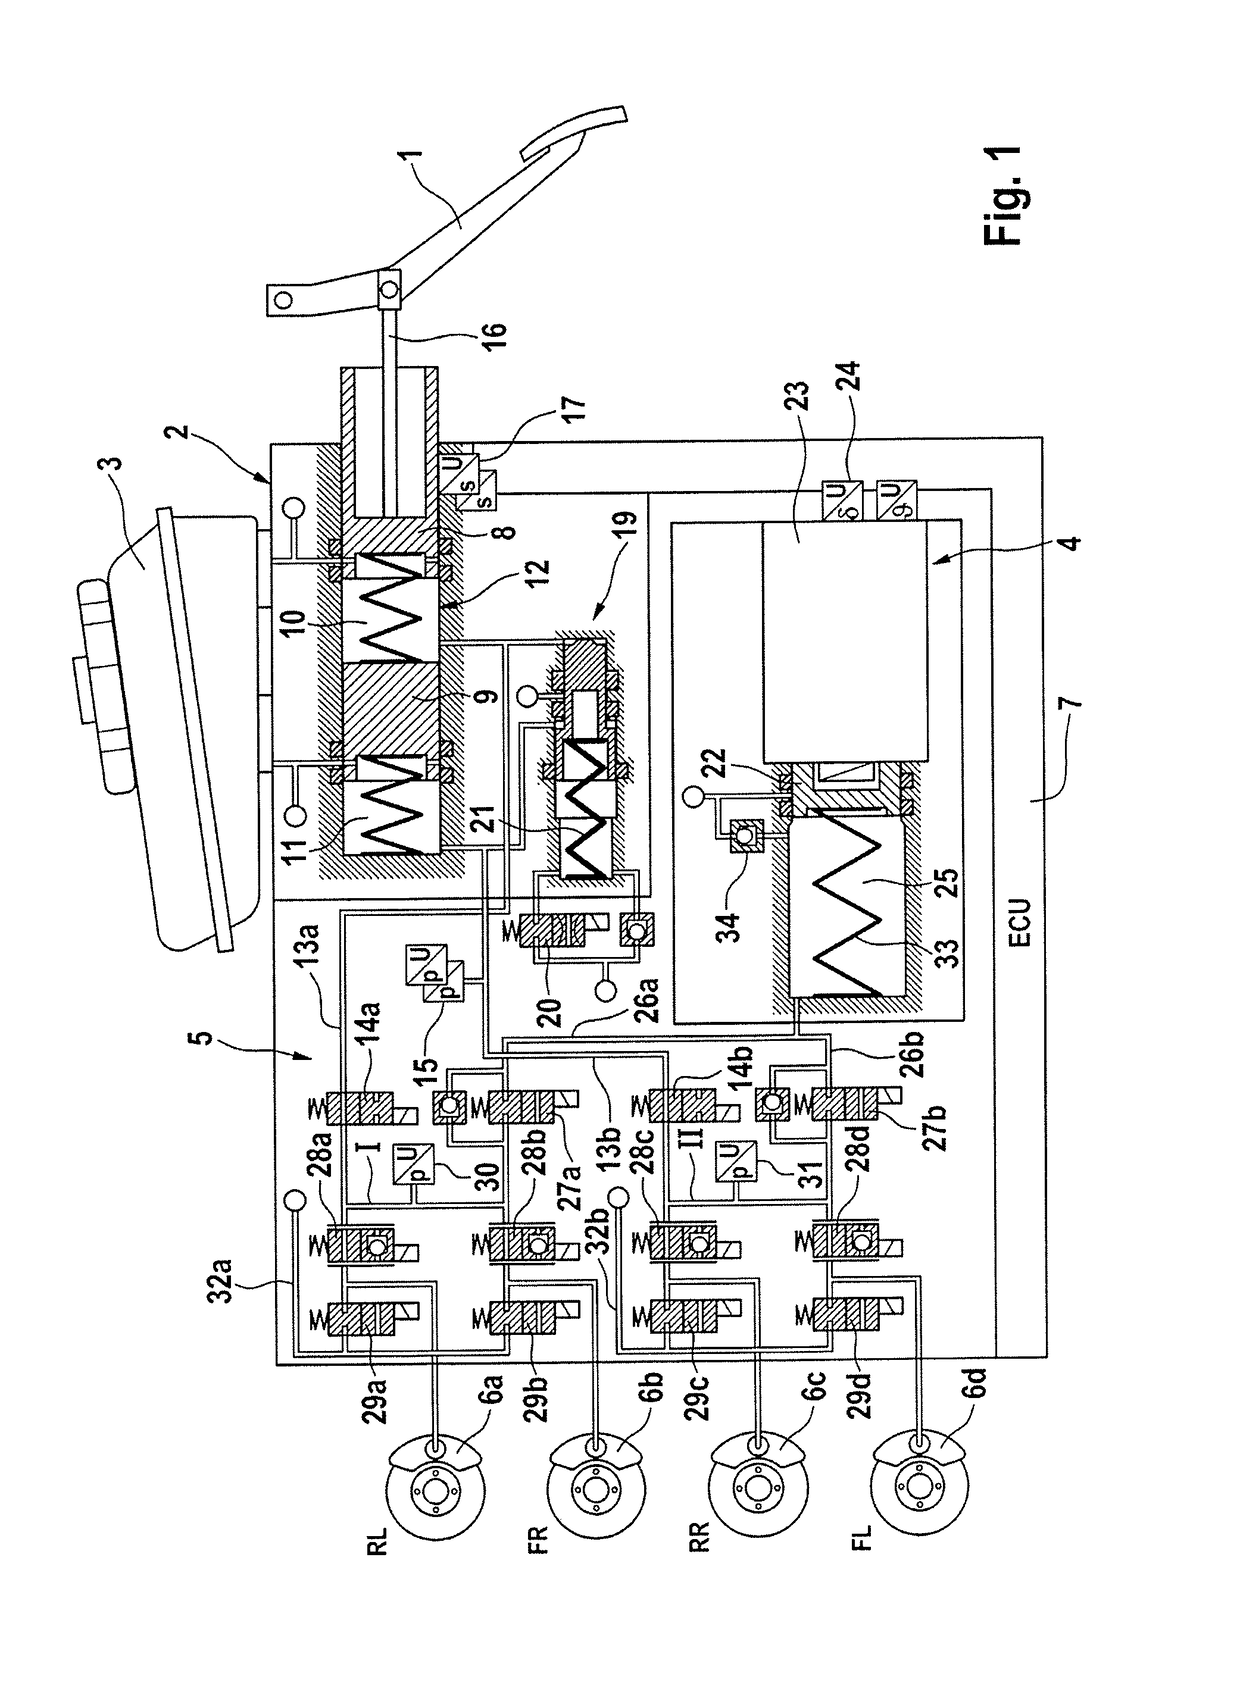 Method for determining a pressure/volume characteristic curve of a wheel brake